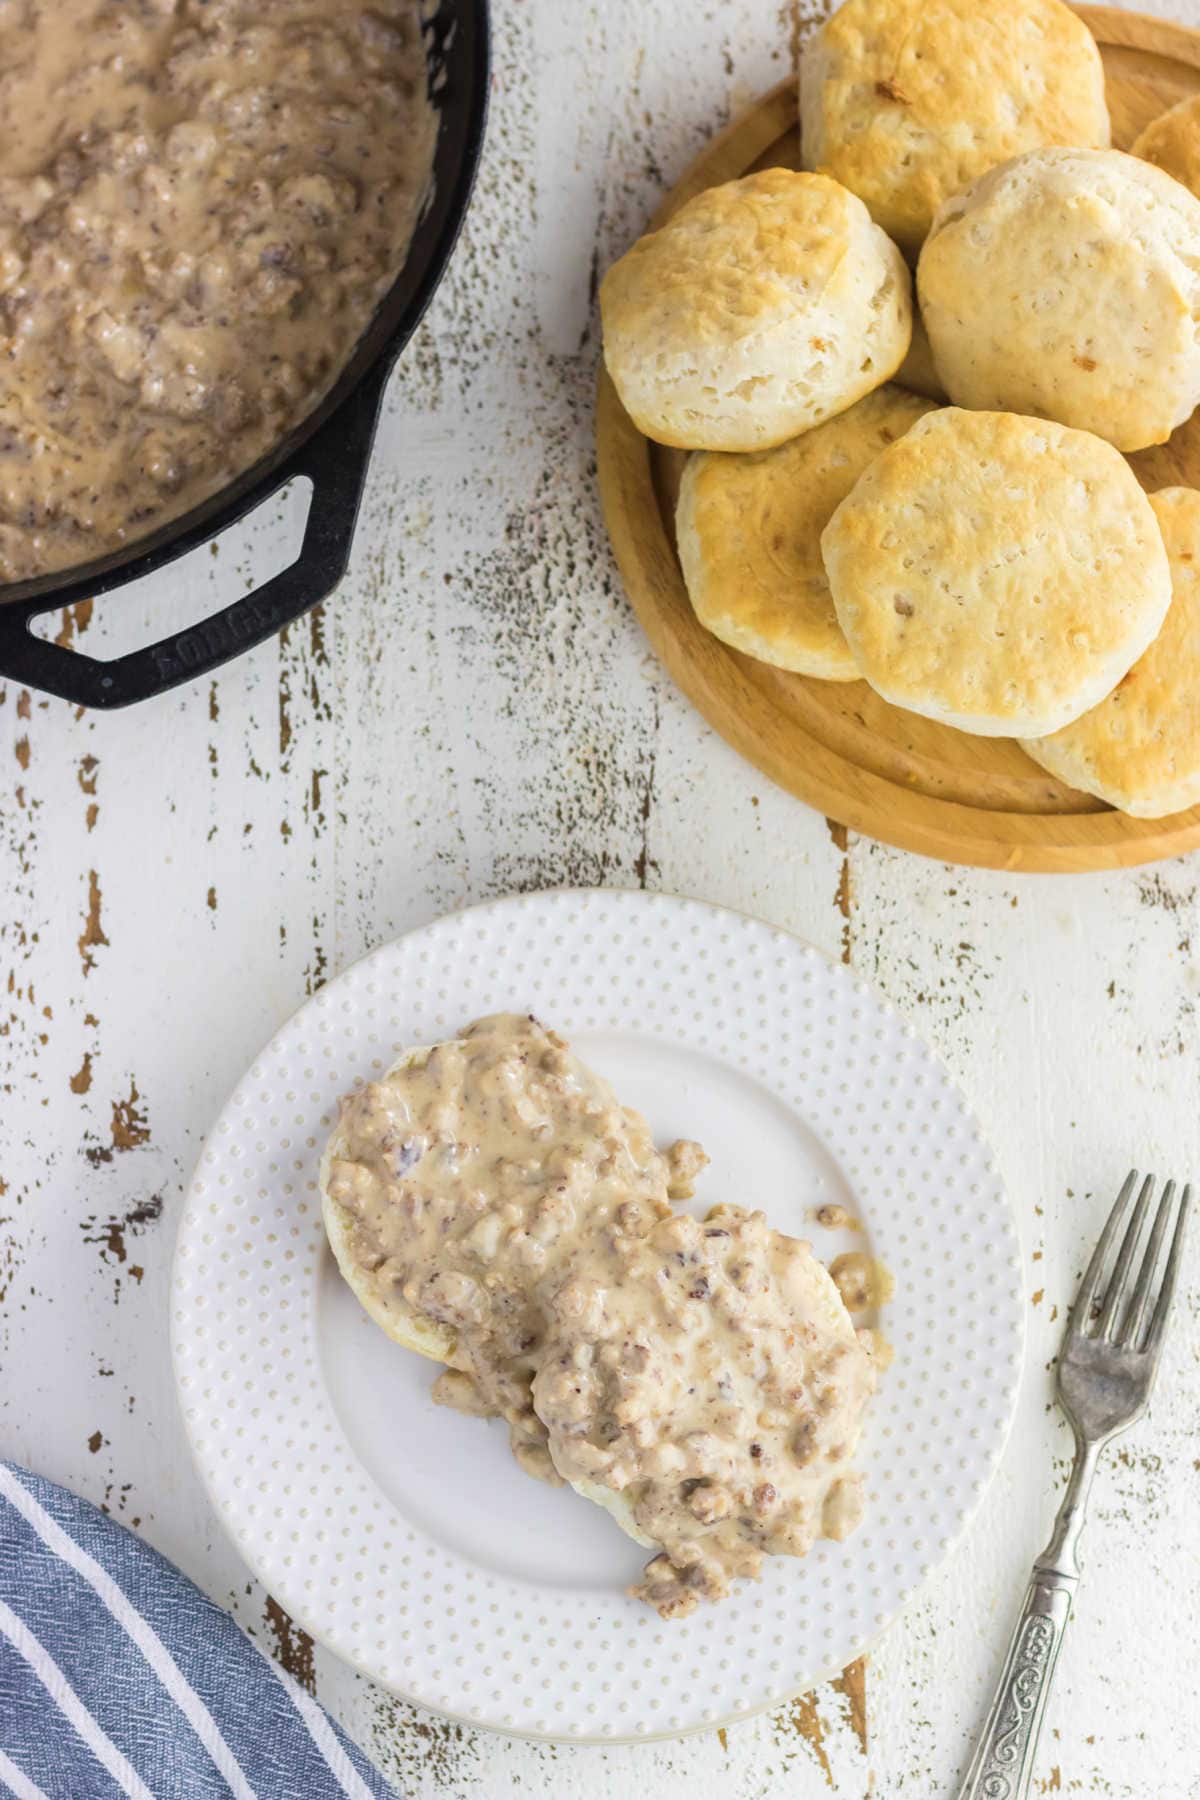 Overhead view of biscuits and gravy on a white plate.